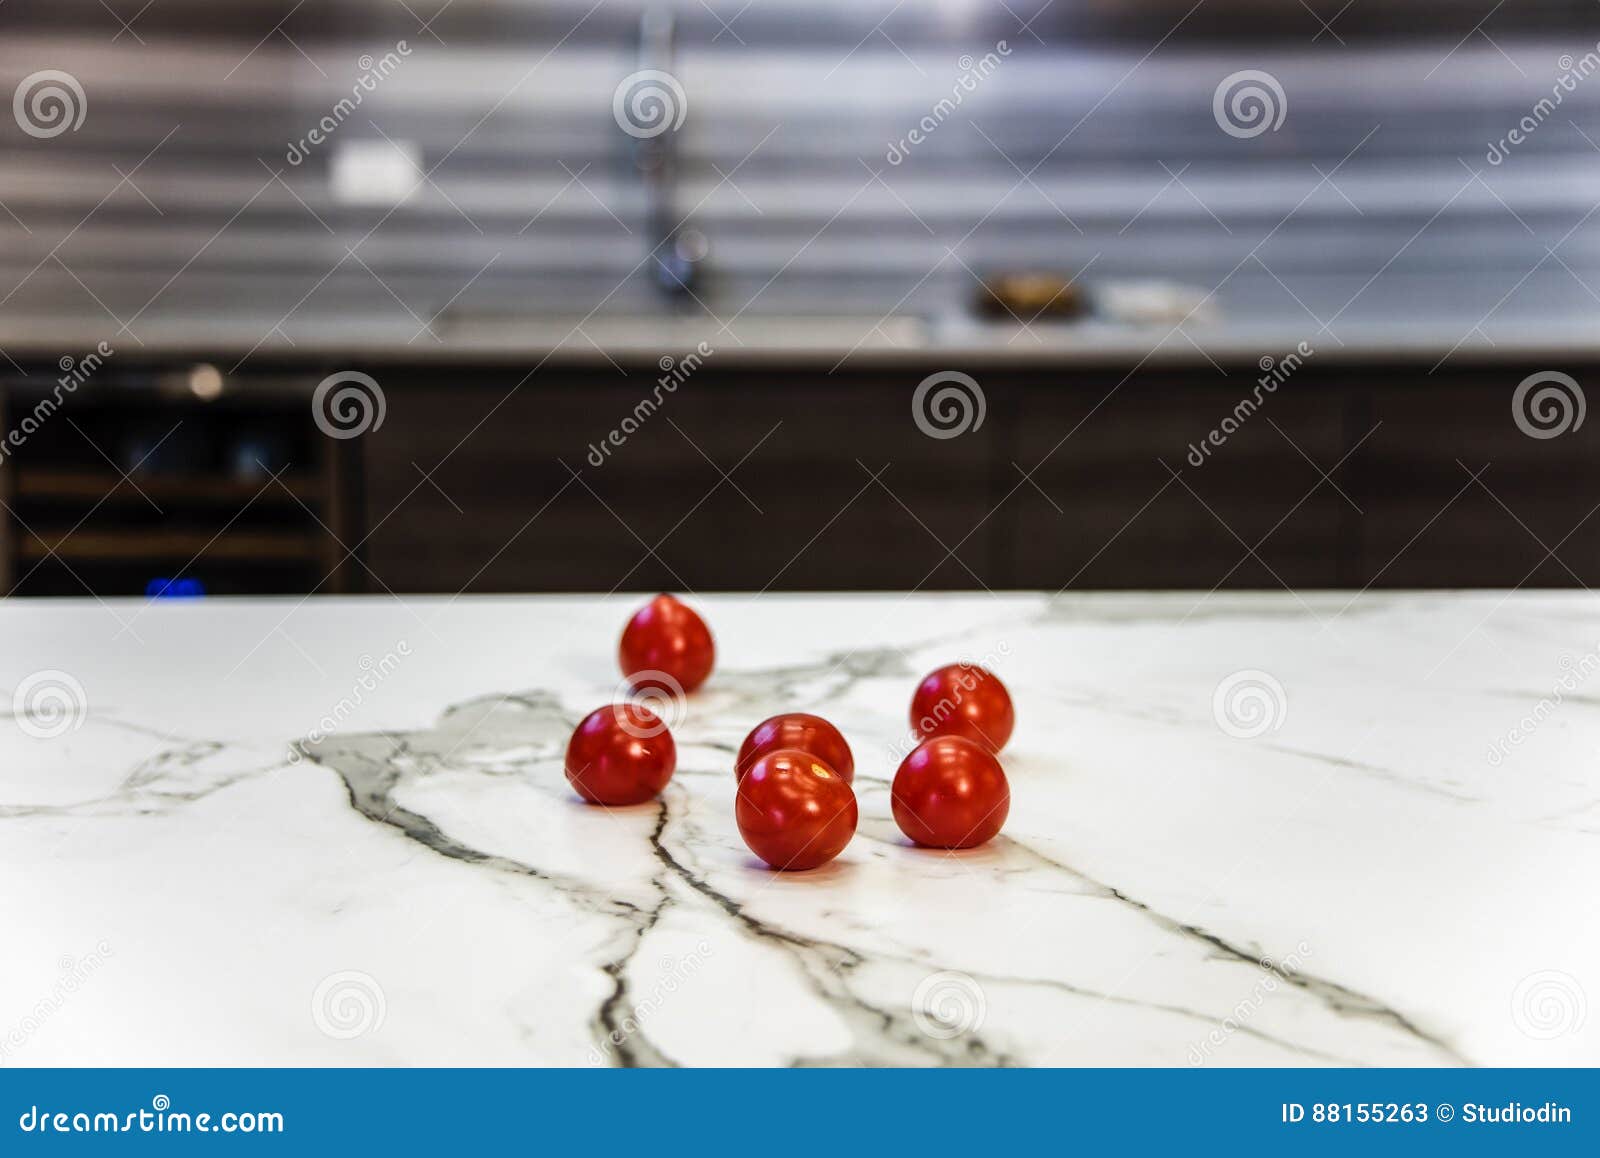 Marble Kitchen Countertop With Tomatoes On Counter Concept Stock